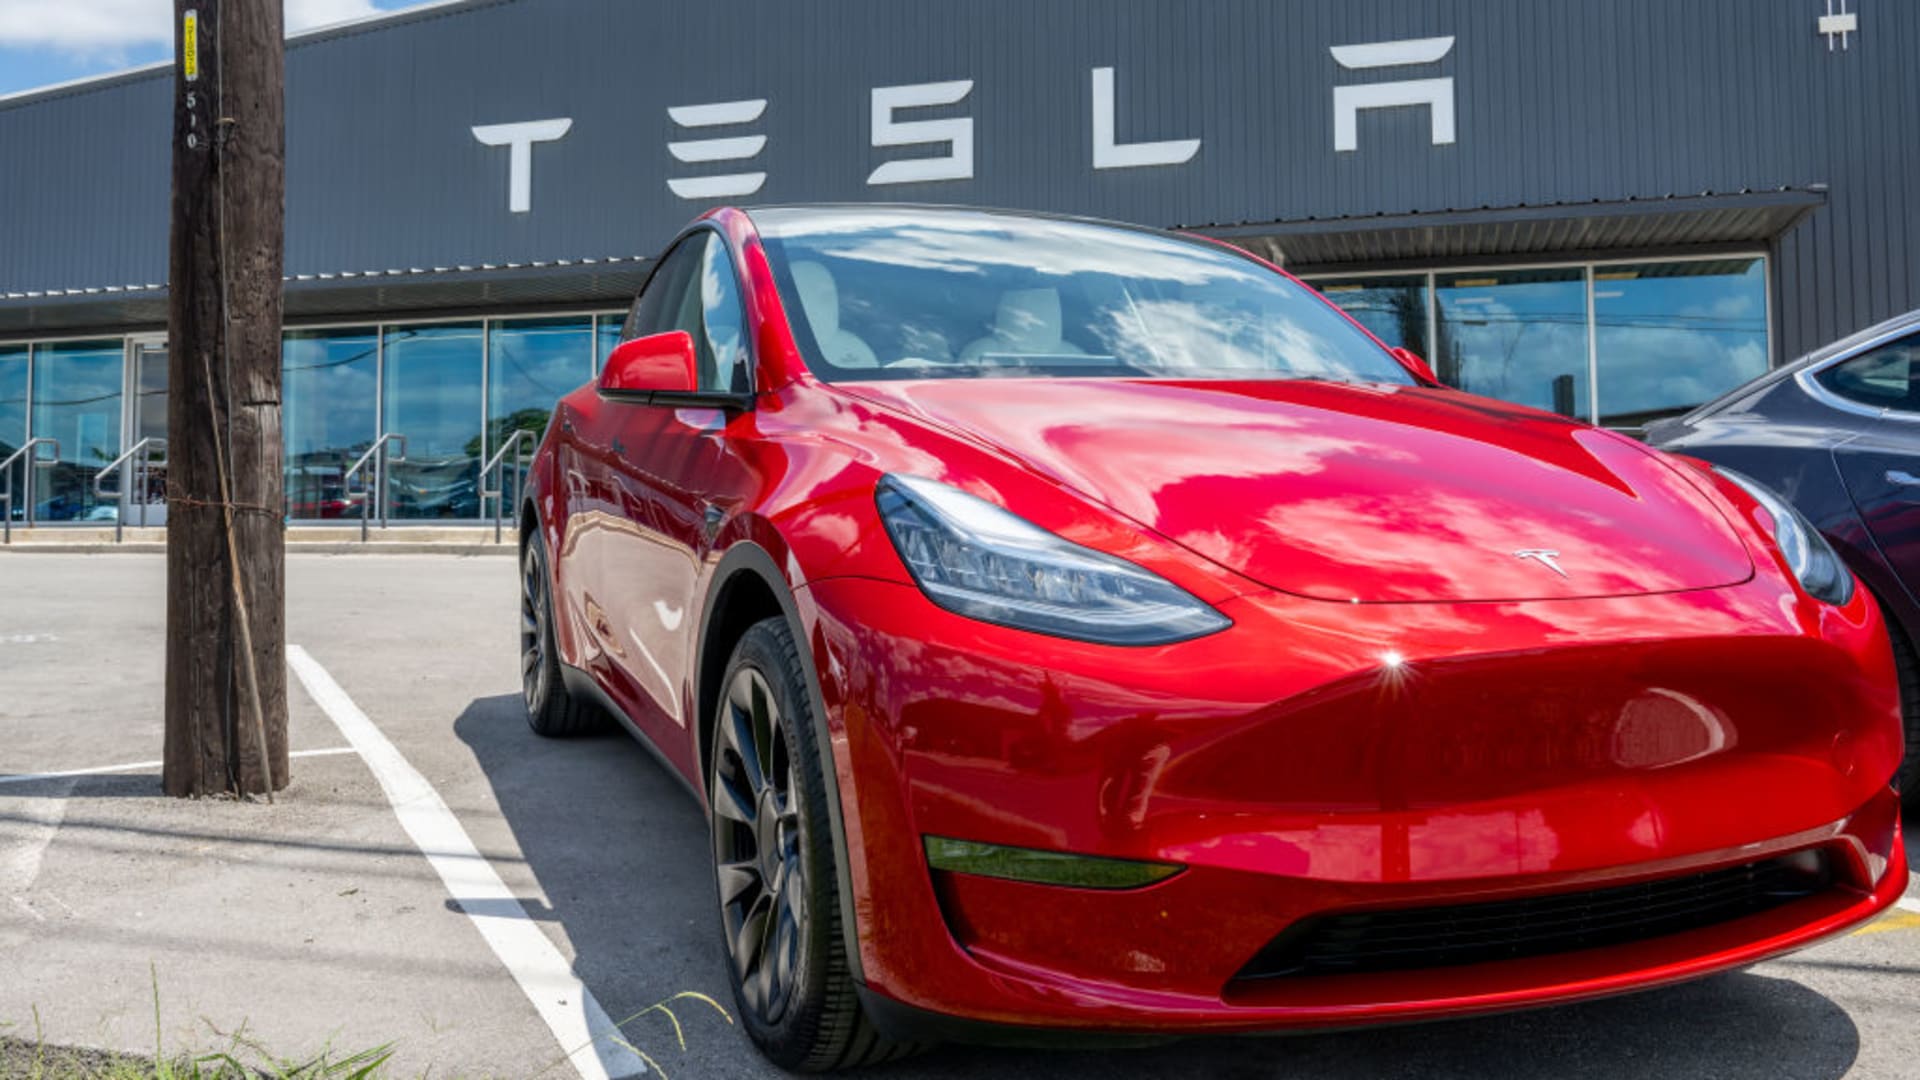 Tesla whistleblowers filed a complaint to the SEC in 2021, but the agency never interviewed them. Here’s what the complaint said Auto Recent